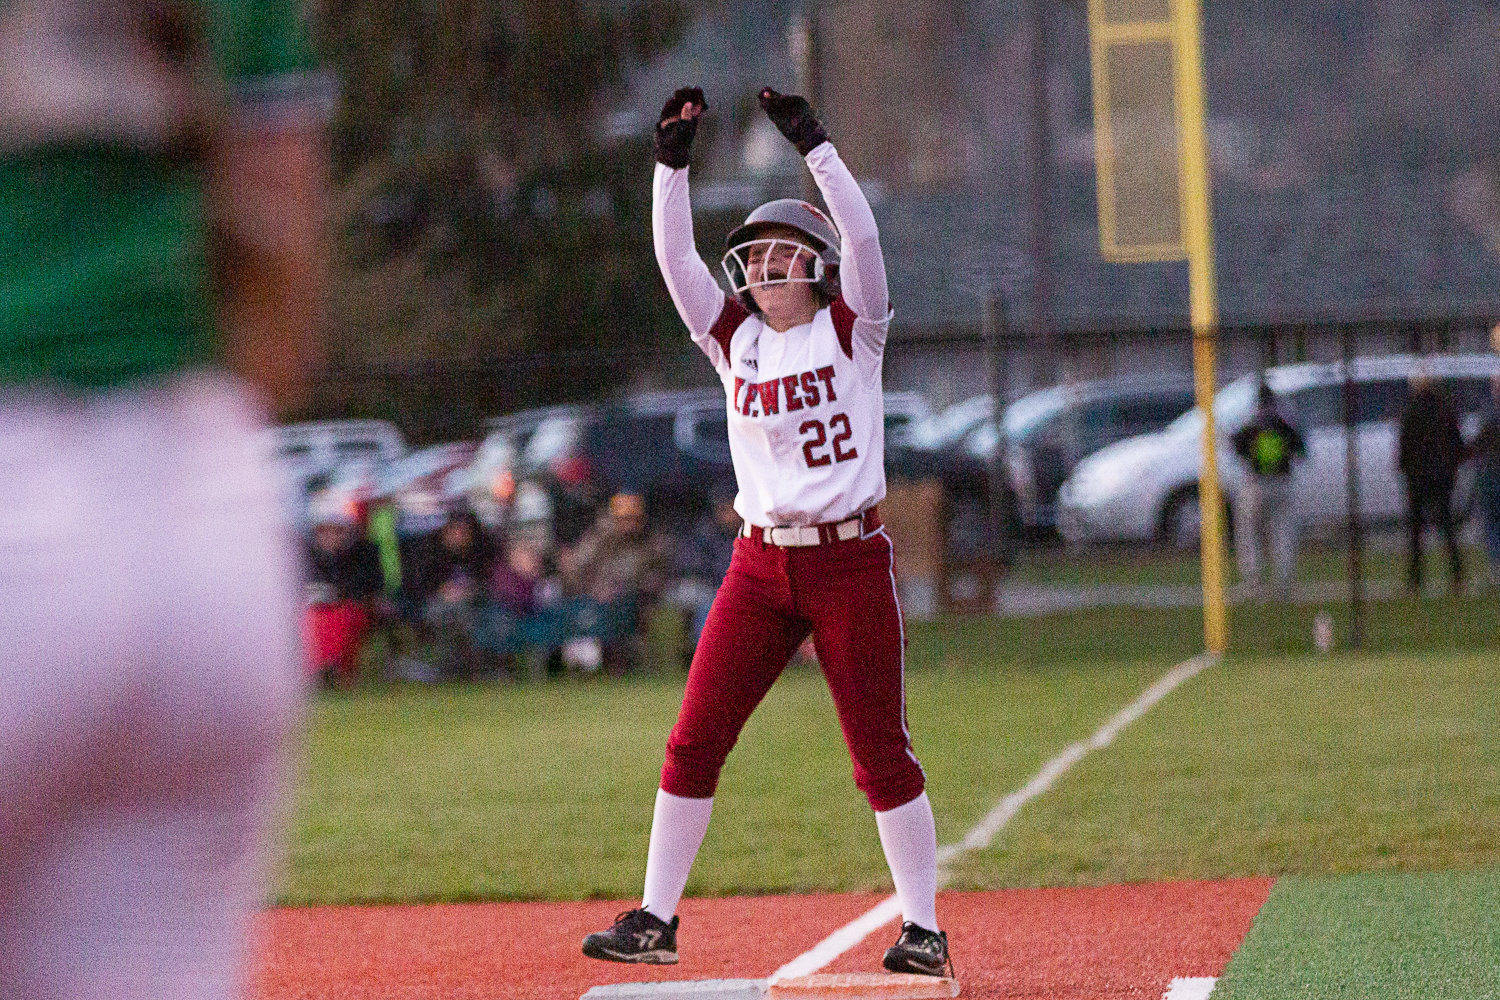 Avalon Myers celebrates her game-tying single in the bottom of the sixth inning of W.F. West's 3-2 win over Tumwater on March 22.